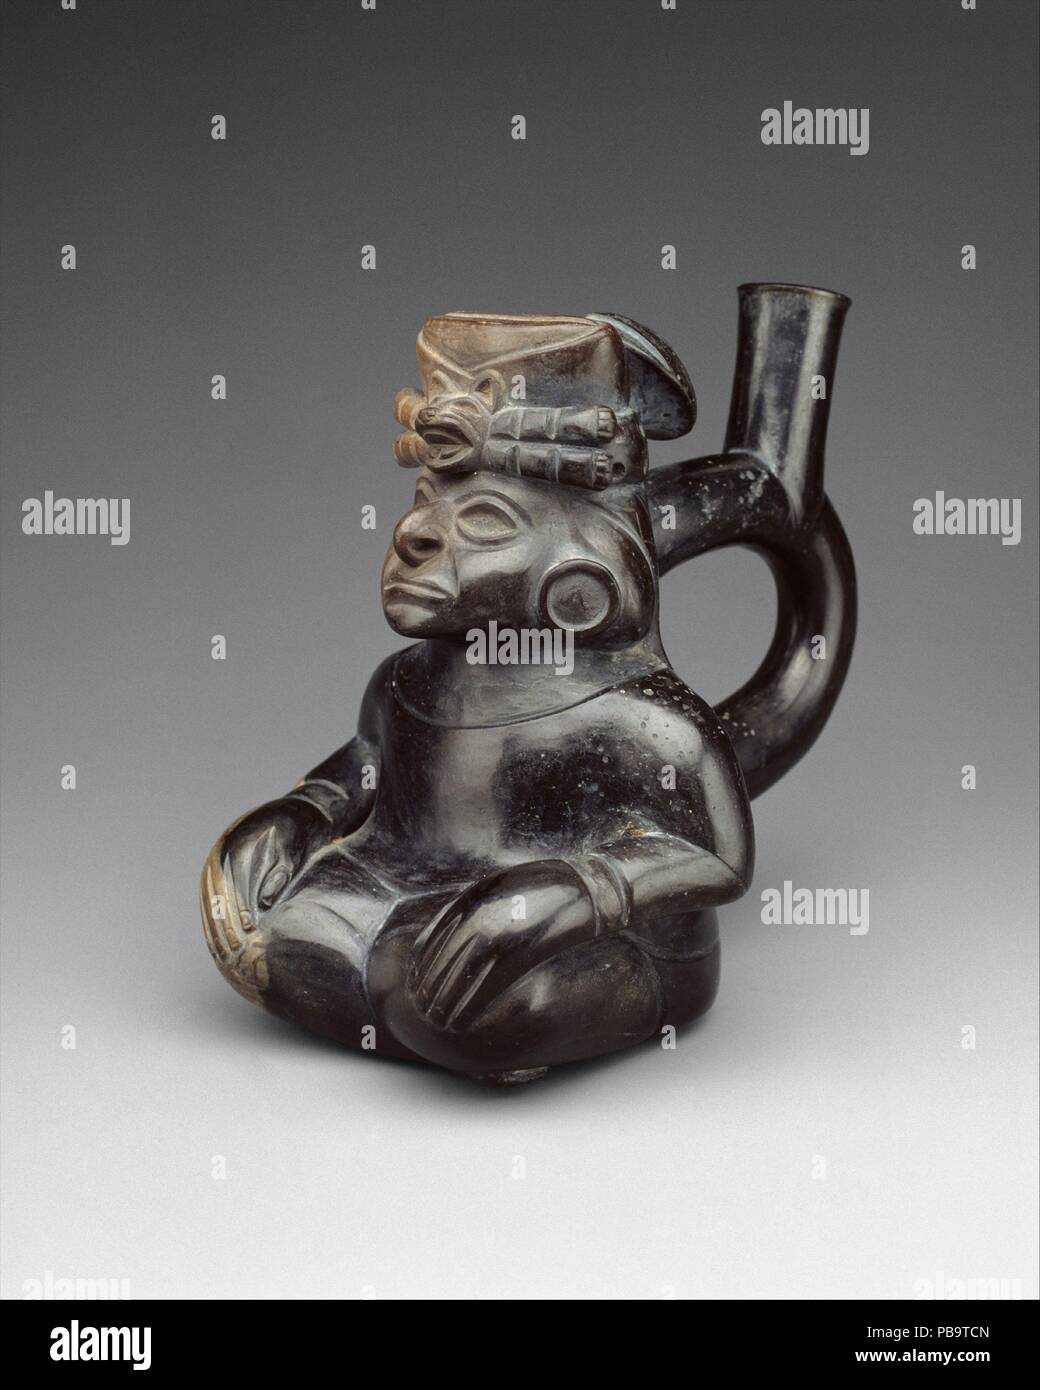 Seated Figure Bottle. Culture: Moche. Dimensions: Overall: 6 3/8 in. (16.19 cm). Date: 2nd-5th century.  The stirrup-spout vessel--so named for the similarity of the spout form to that of a riding saddle stirrup--was a much-favored bottle shape in Precolumbian Peru. It has been suggested that the peculiarity of the double-branch/single-spout shape was to prevent evaporation of the liquids it contained. The stirrup spout was used on ceramic vessels in northern Peru for about twenty-five hundred years. Early in the first millennium B.C., the stirrup-spout bottle was elaborated into sculptural de Stock Photo